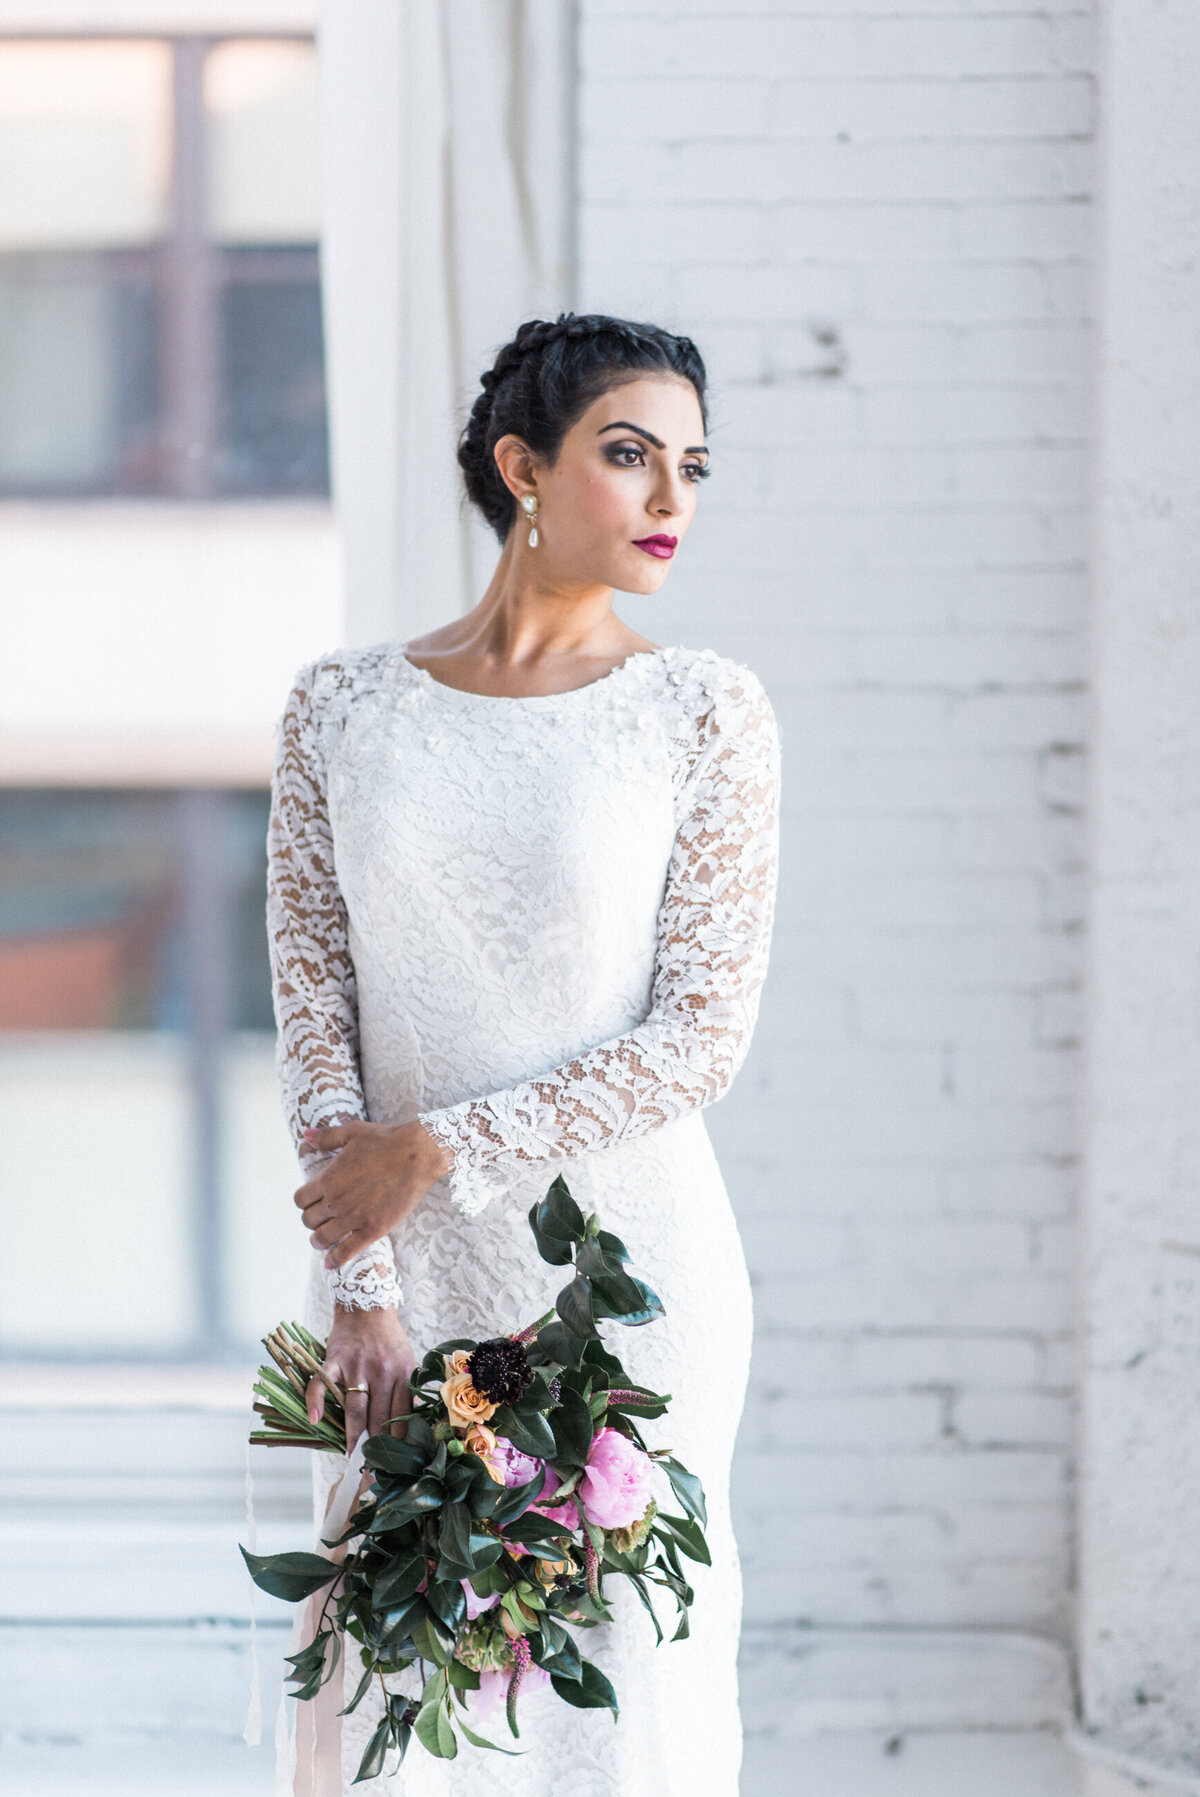 Hudson's bateau neckline is adorned with small 3D flowers and crystals which continue onto the shoulders of the sheer lace sleeves.